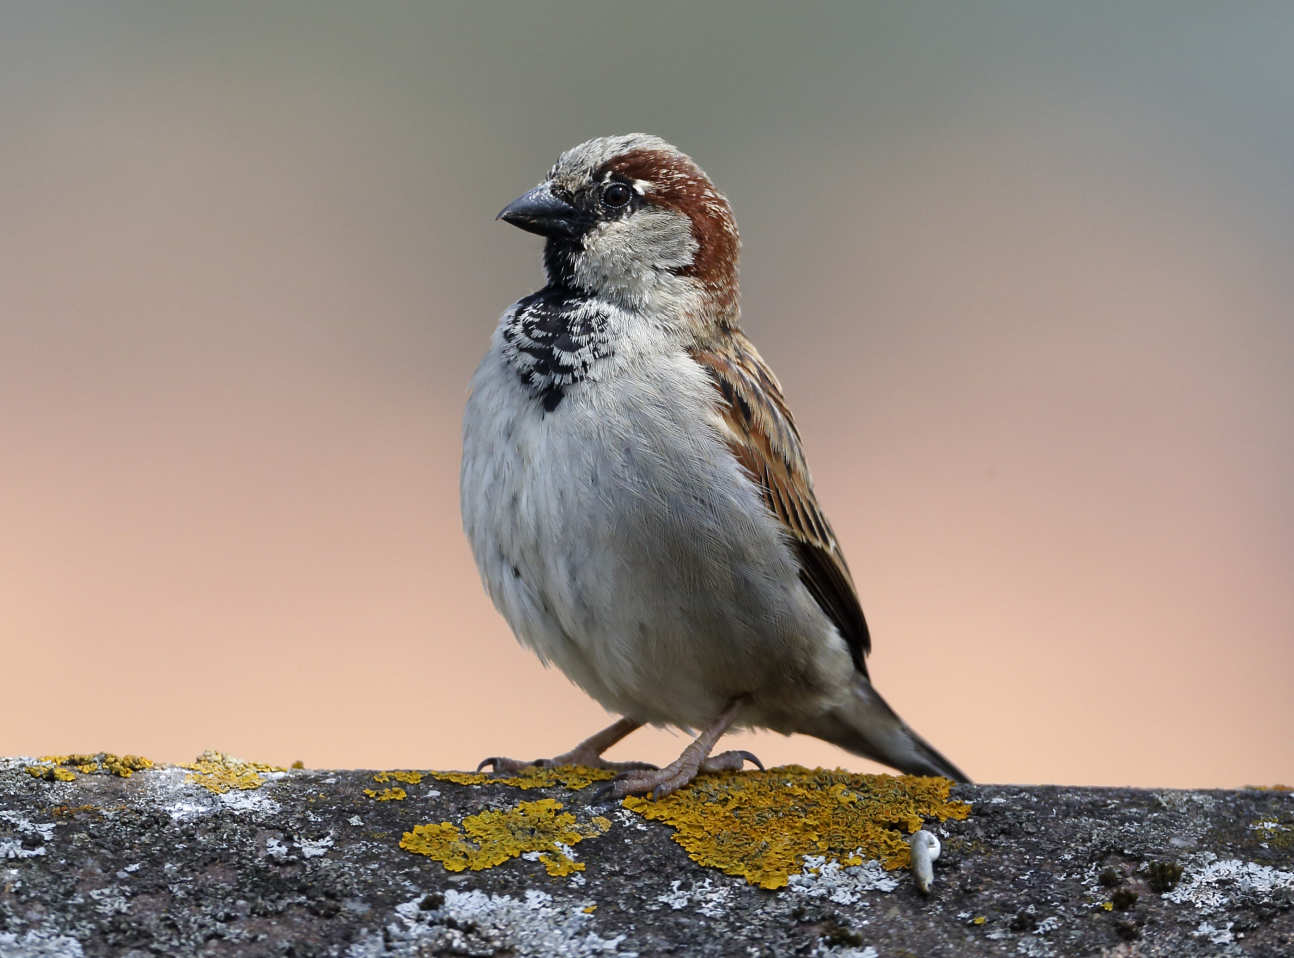 Male sparrow standing tall